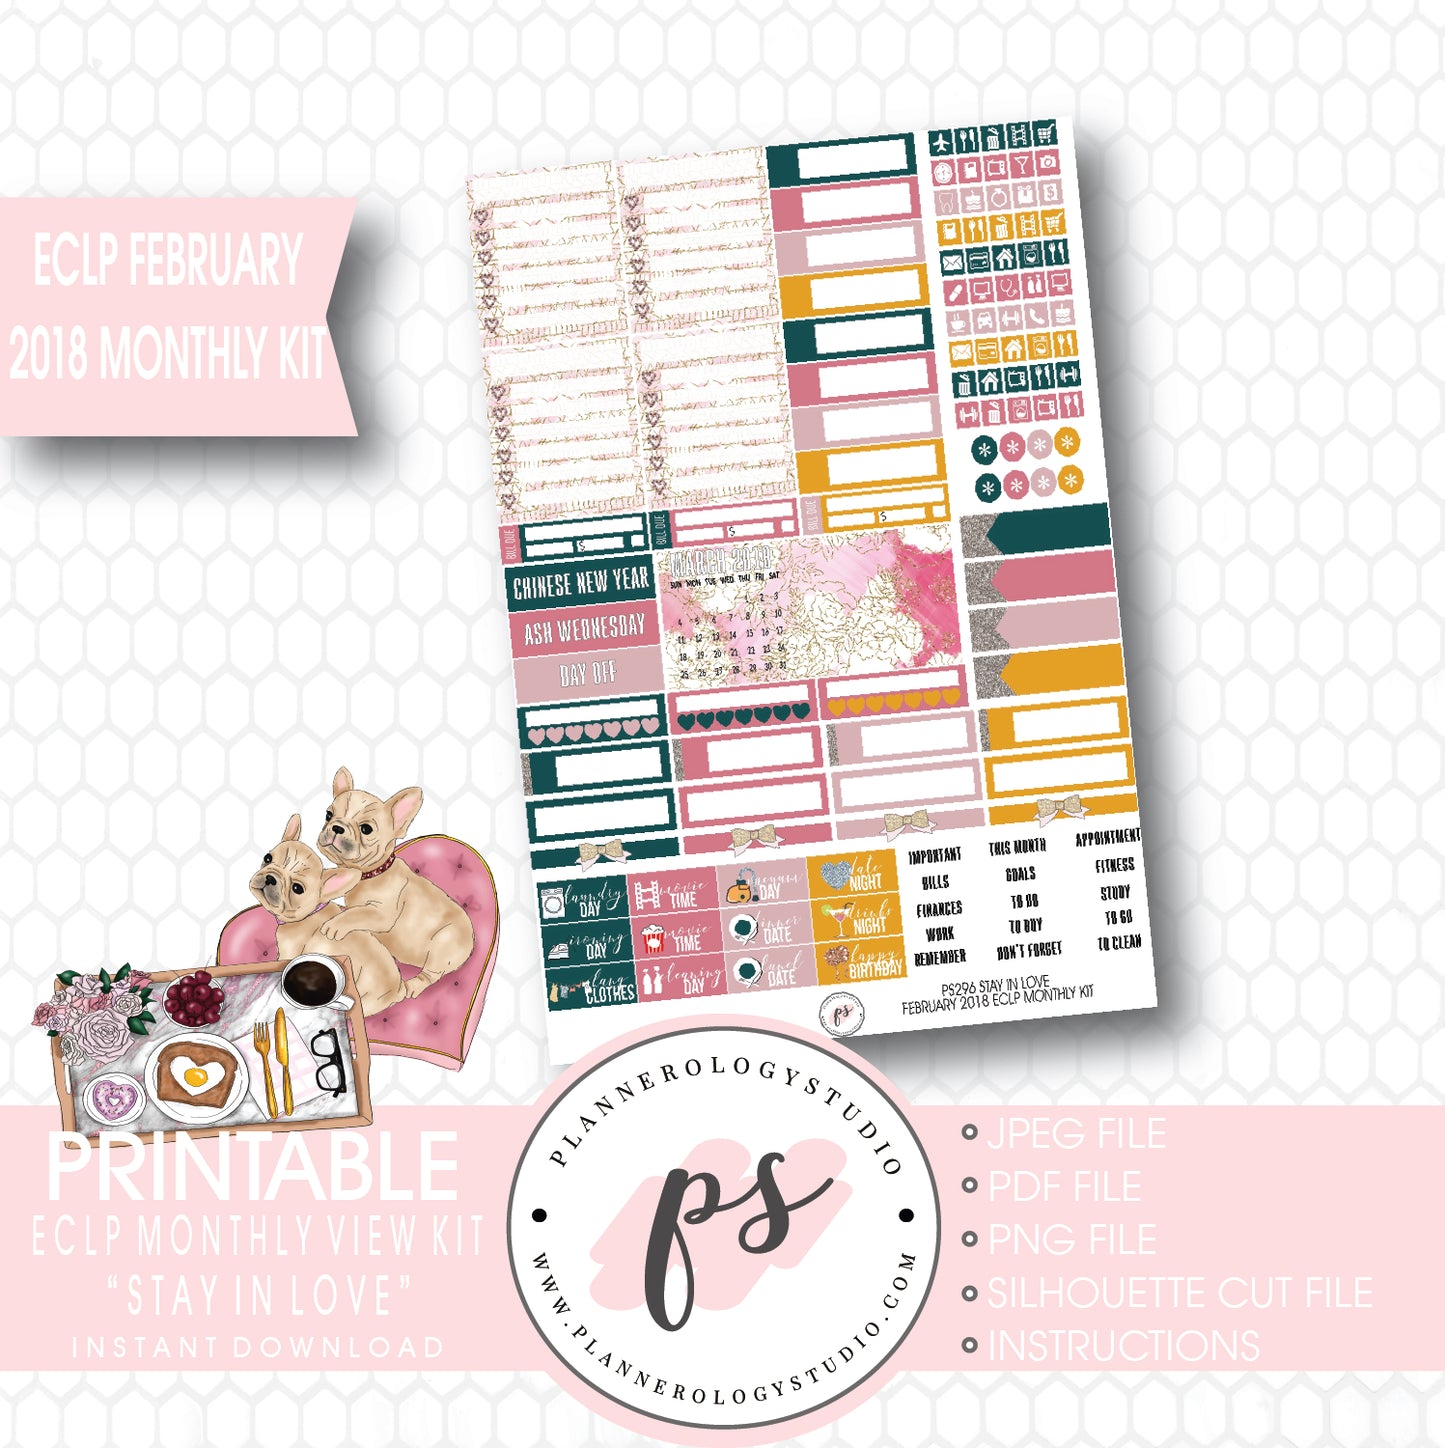 Stay in Love February 2018 Monthly View Kit Digital Printable Planner Stickers (for use with ECLP) - Plannerologystudio